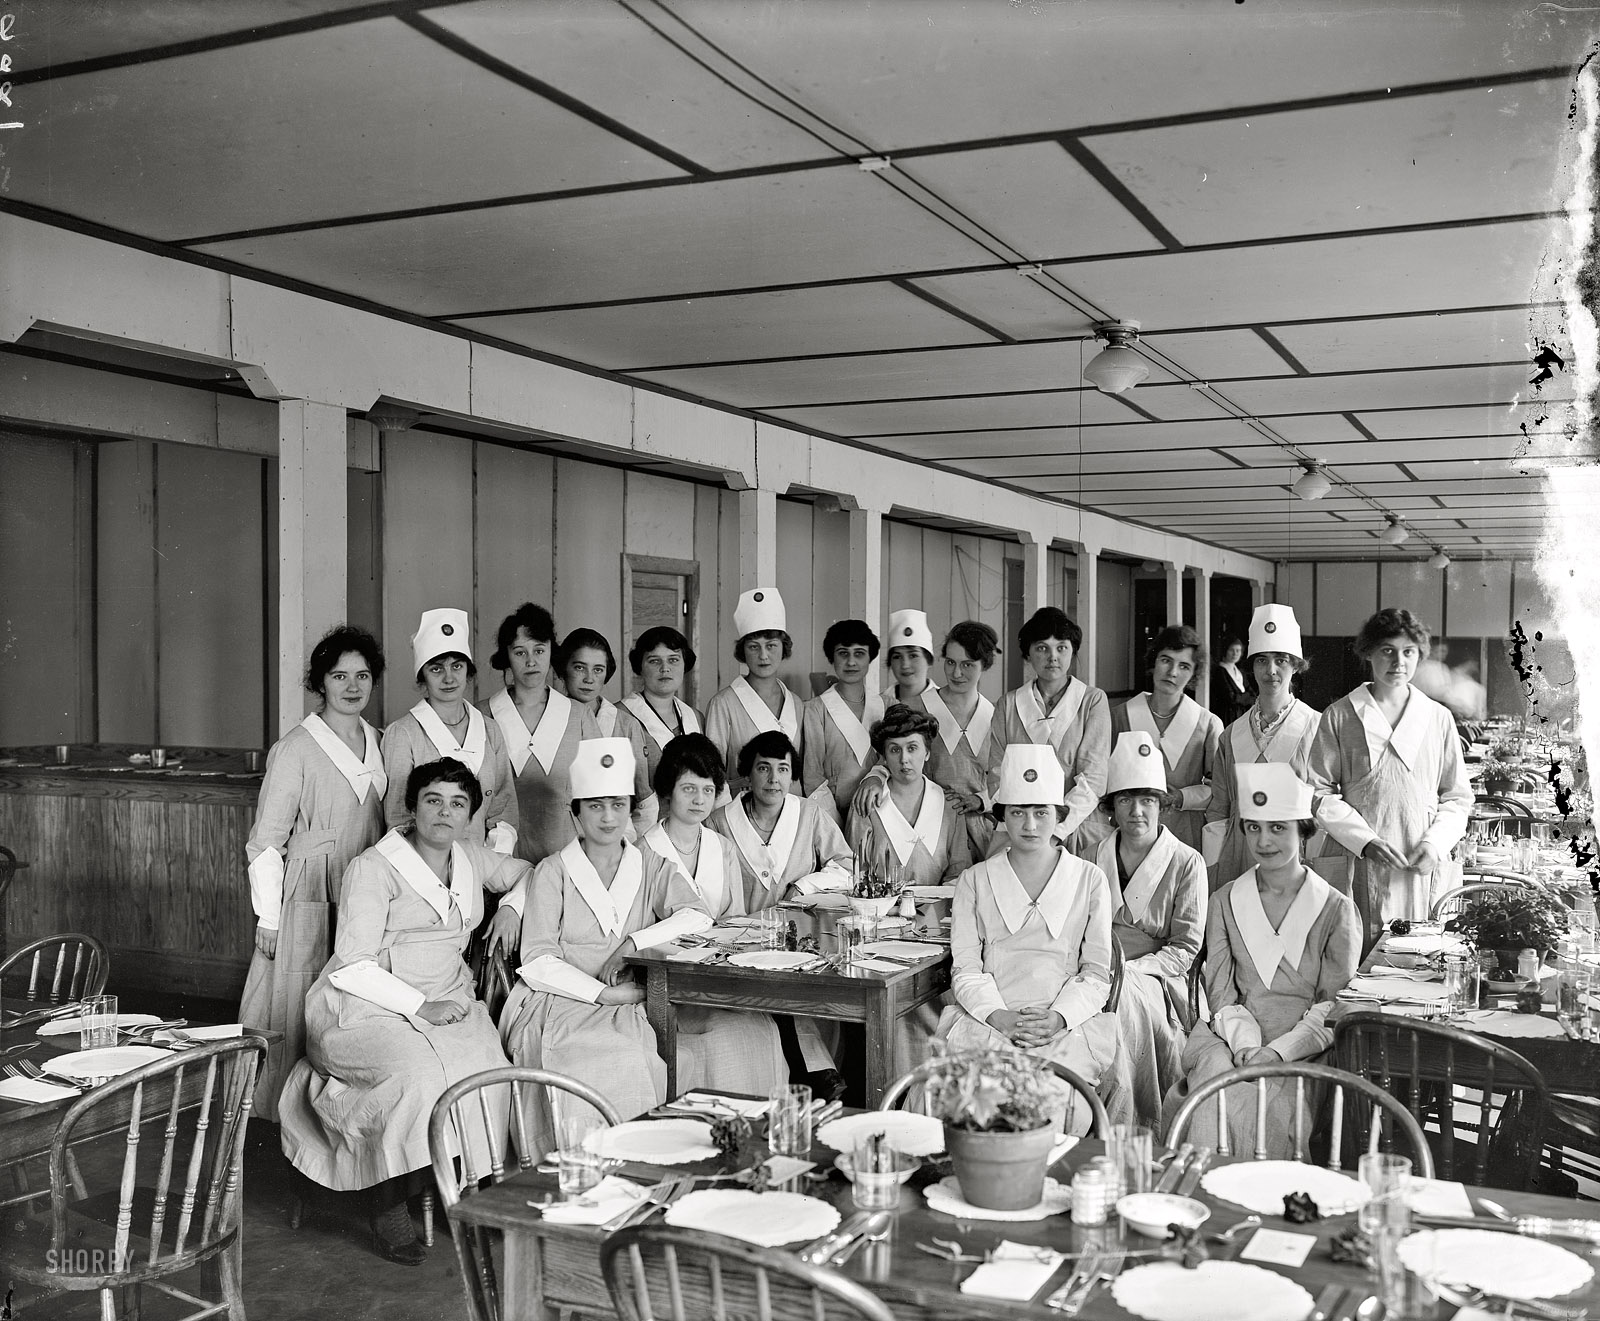 Washington, D.C., circa 1918. "U.S. Food Administration." The cafeteria in one of Uncle Sam's new bureaucracies. Harris & Ewing glass negative. View full size.